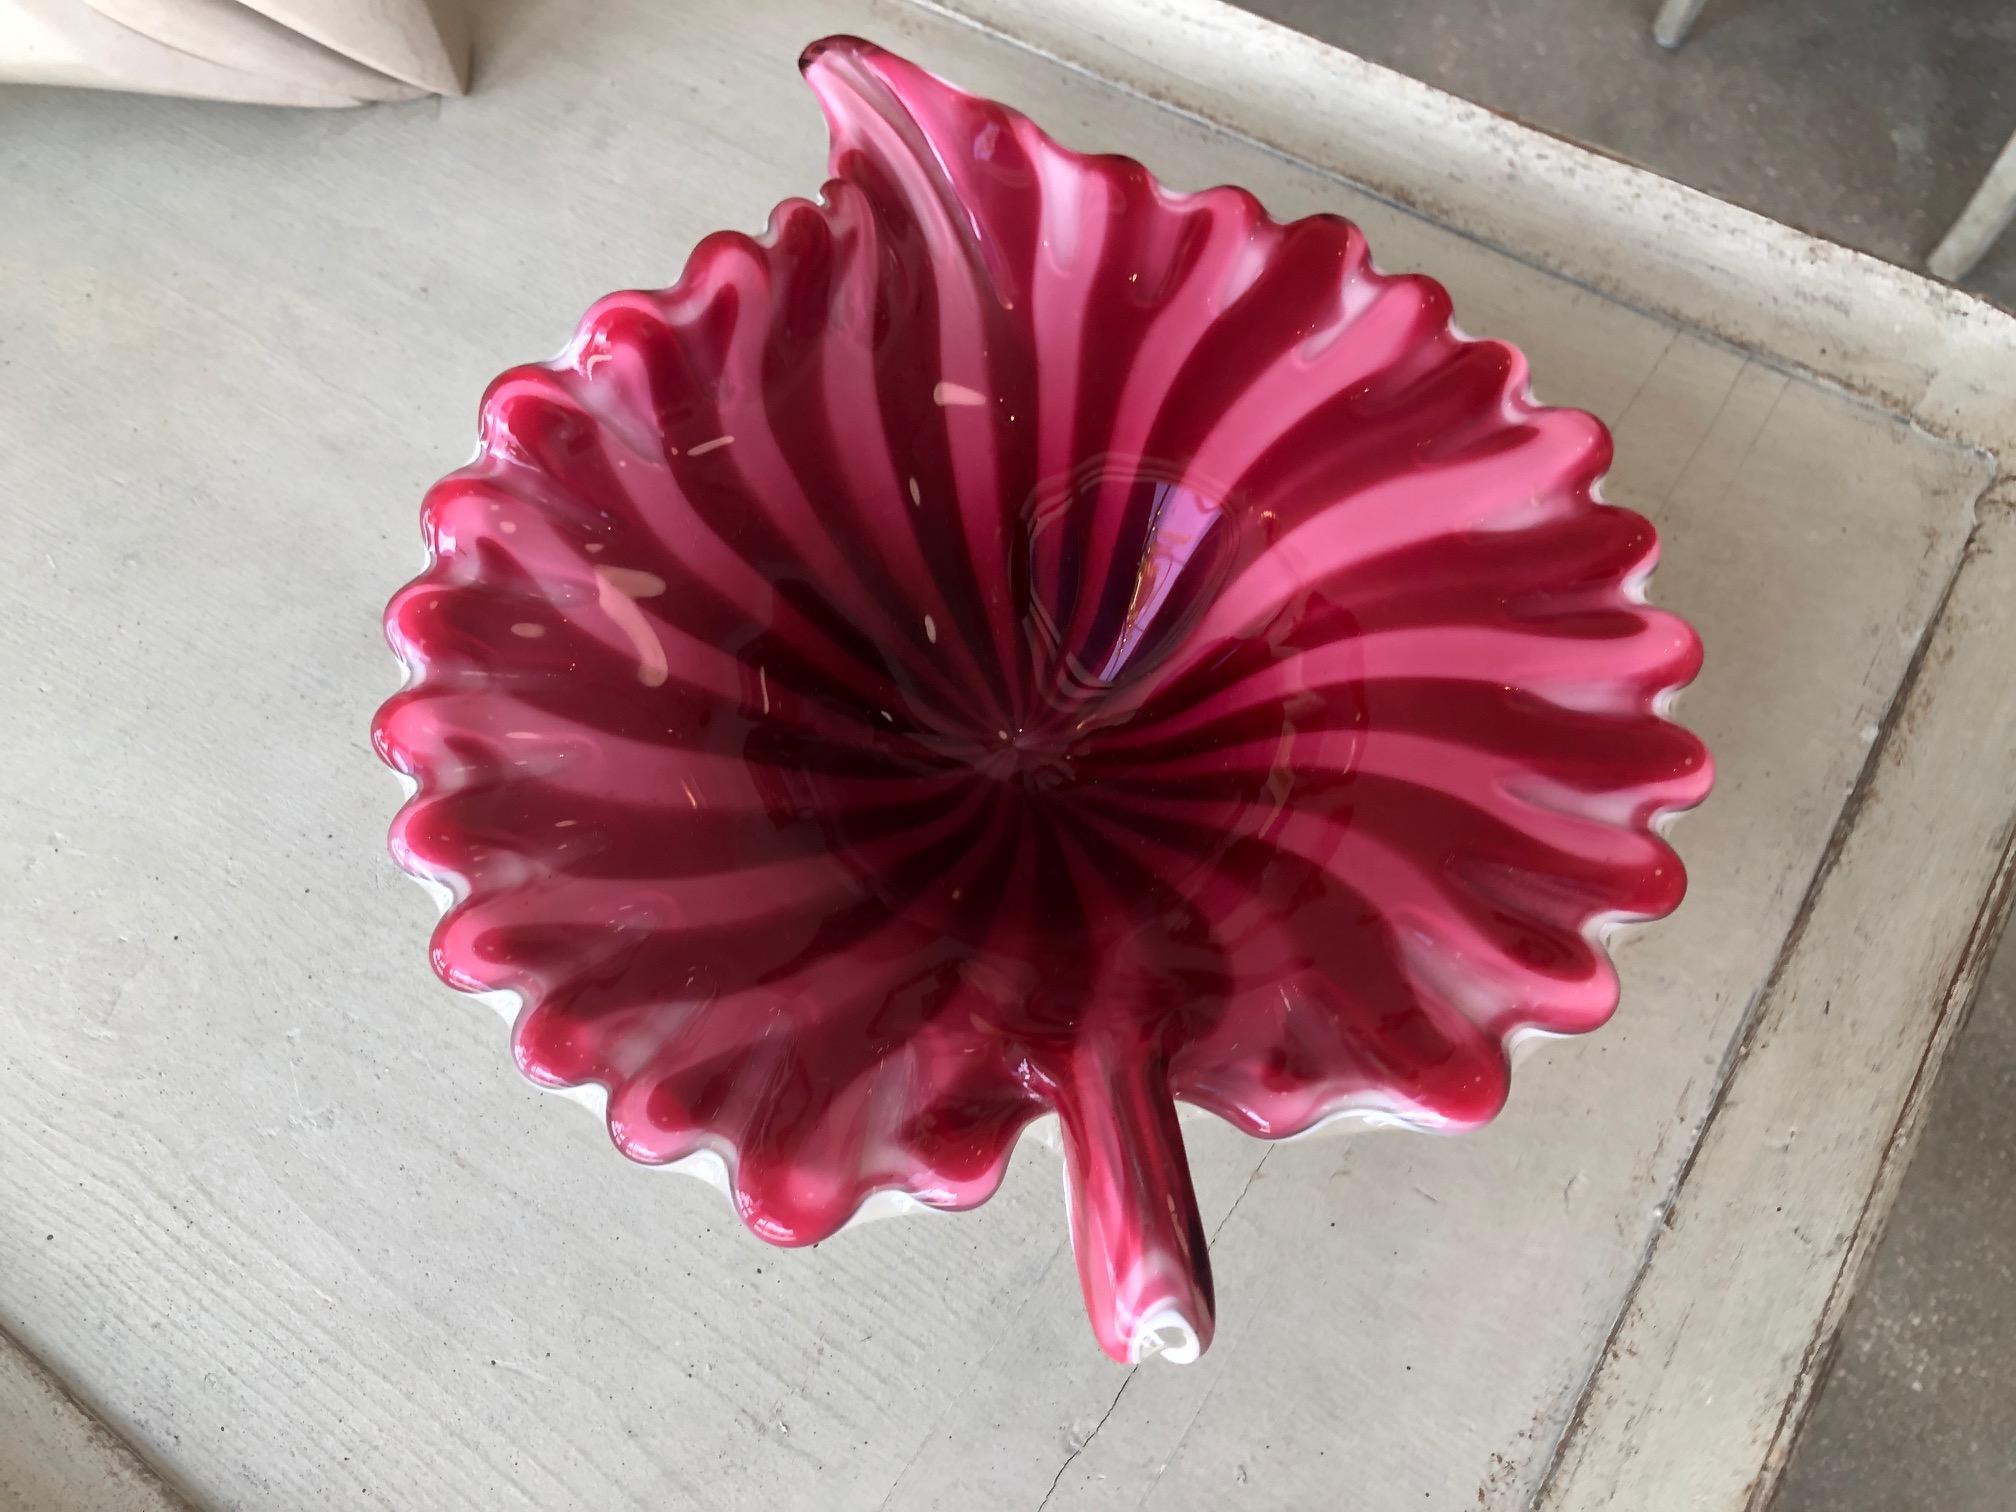 Gorgeous Murano bowl by Fratelli Toso, circa 1960s. Superb condition. Red and pink interior color with white exterior. 

Bowl measures (inches):
3.5